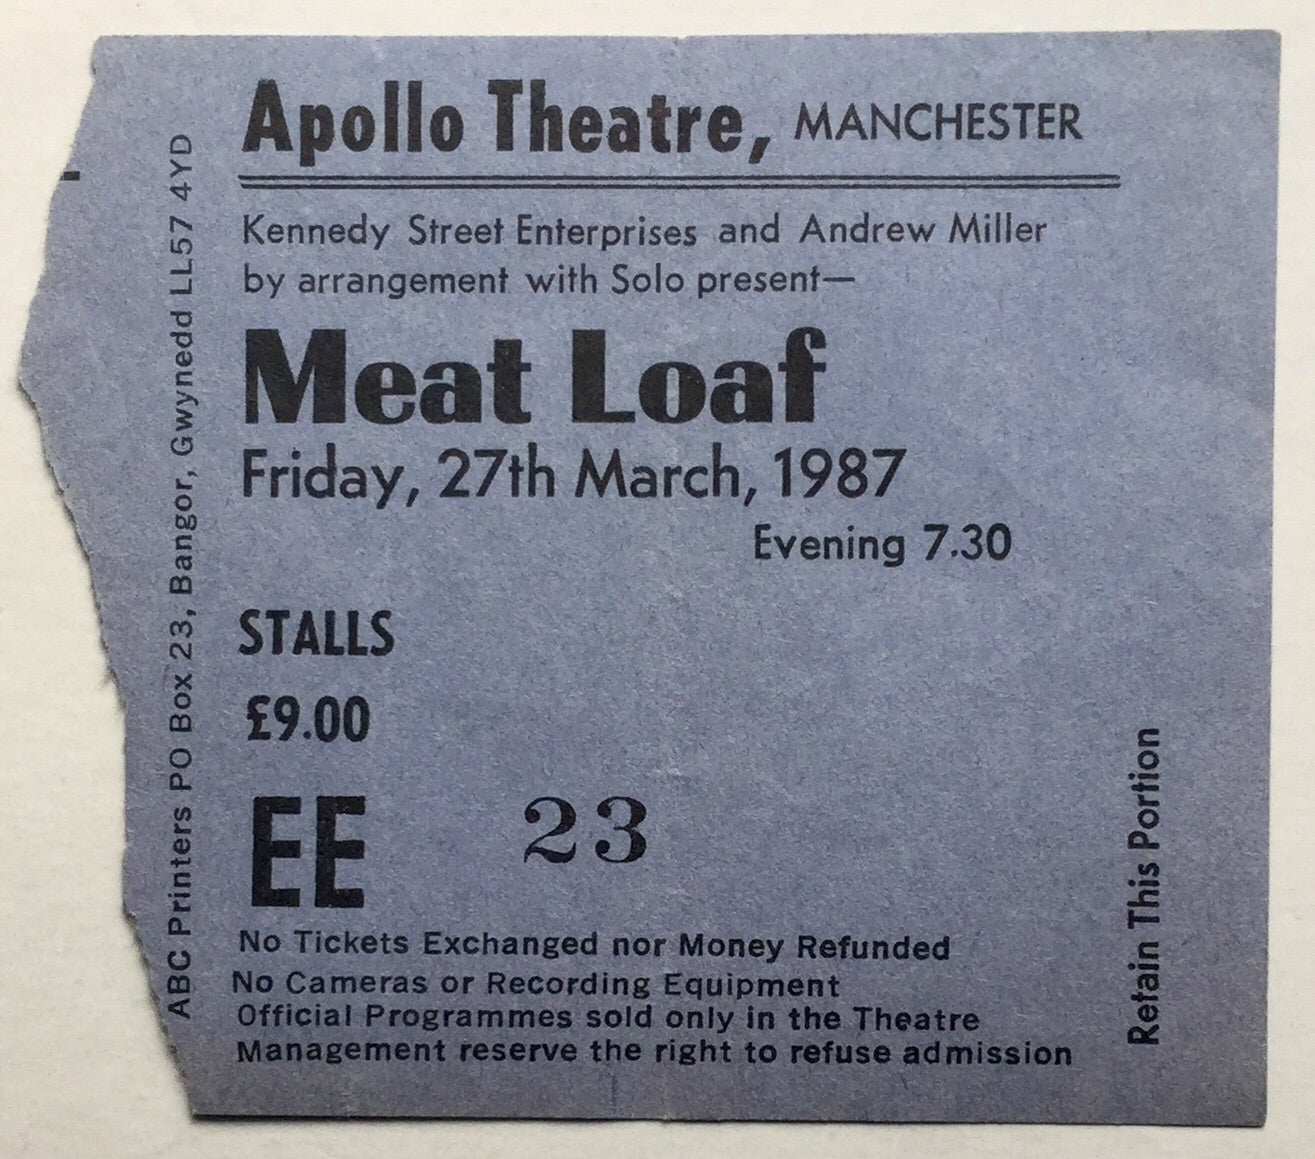 Meat Loaf Original Used Concert Ticket Apollo Theatre Manchester 27th Mar 1987